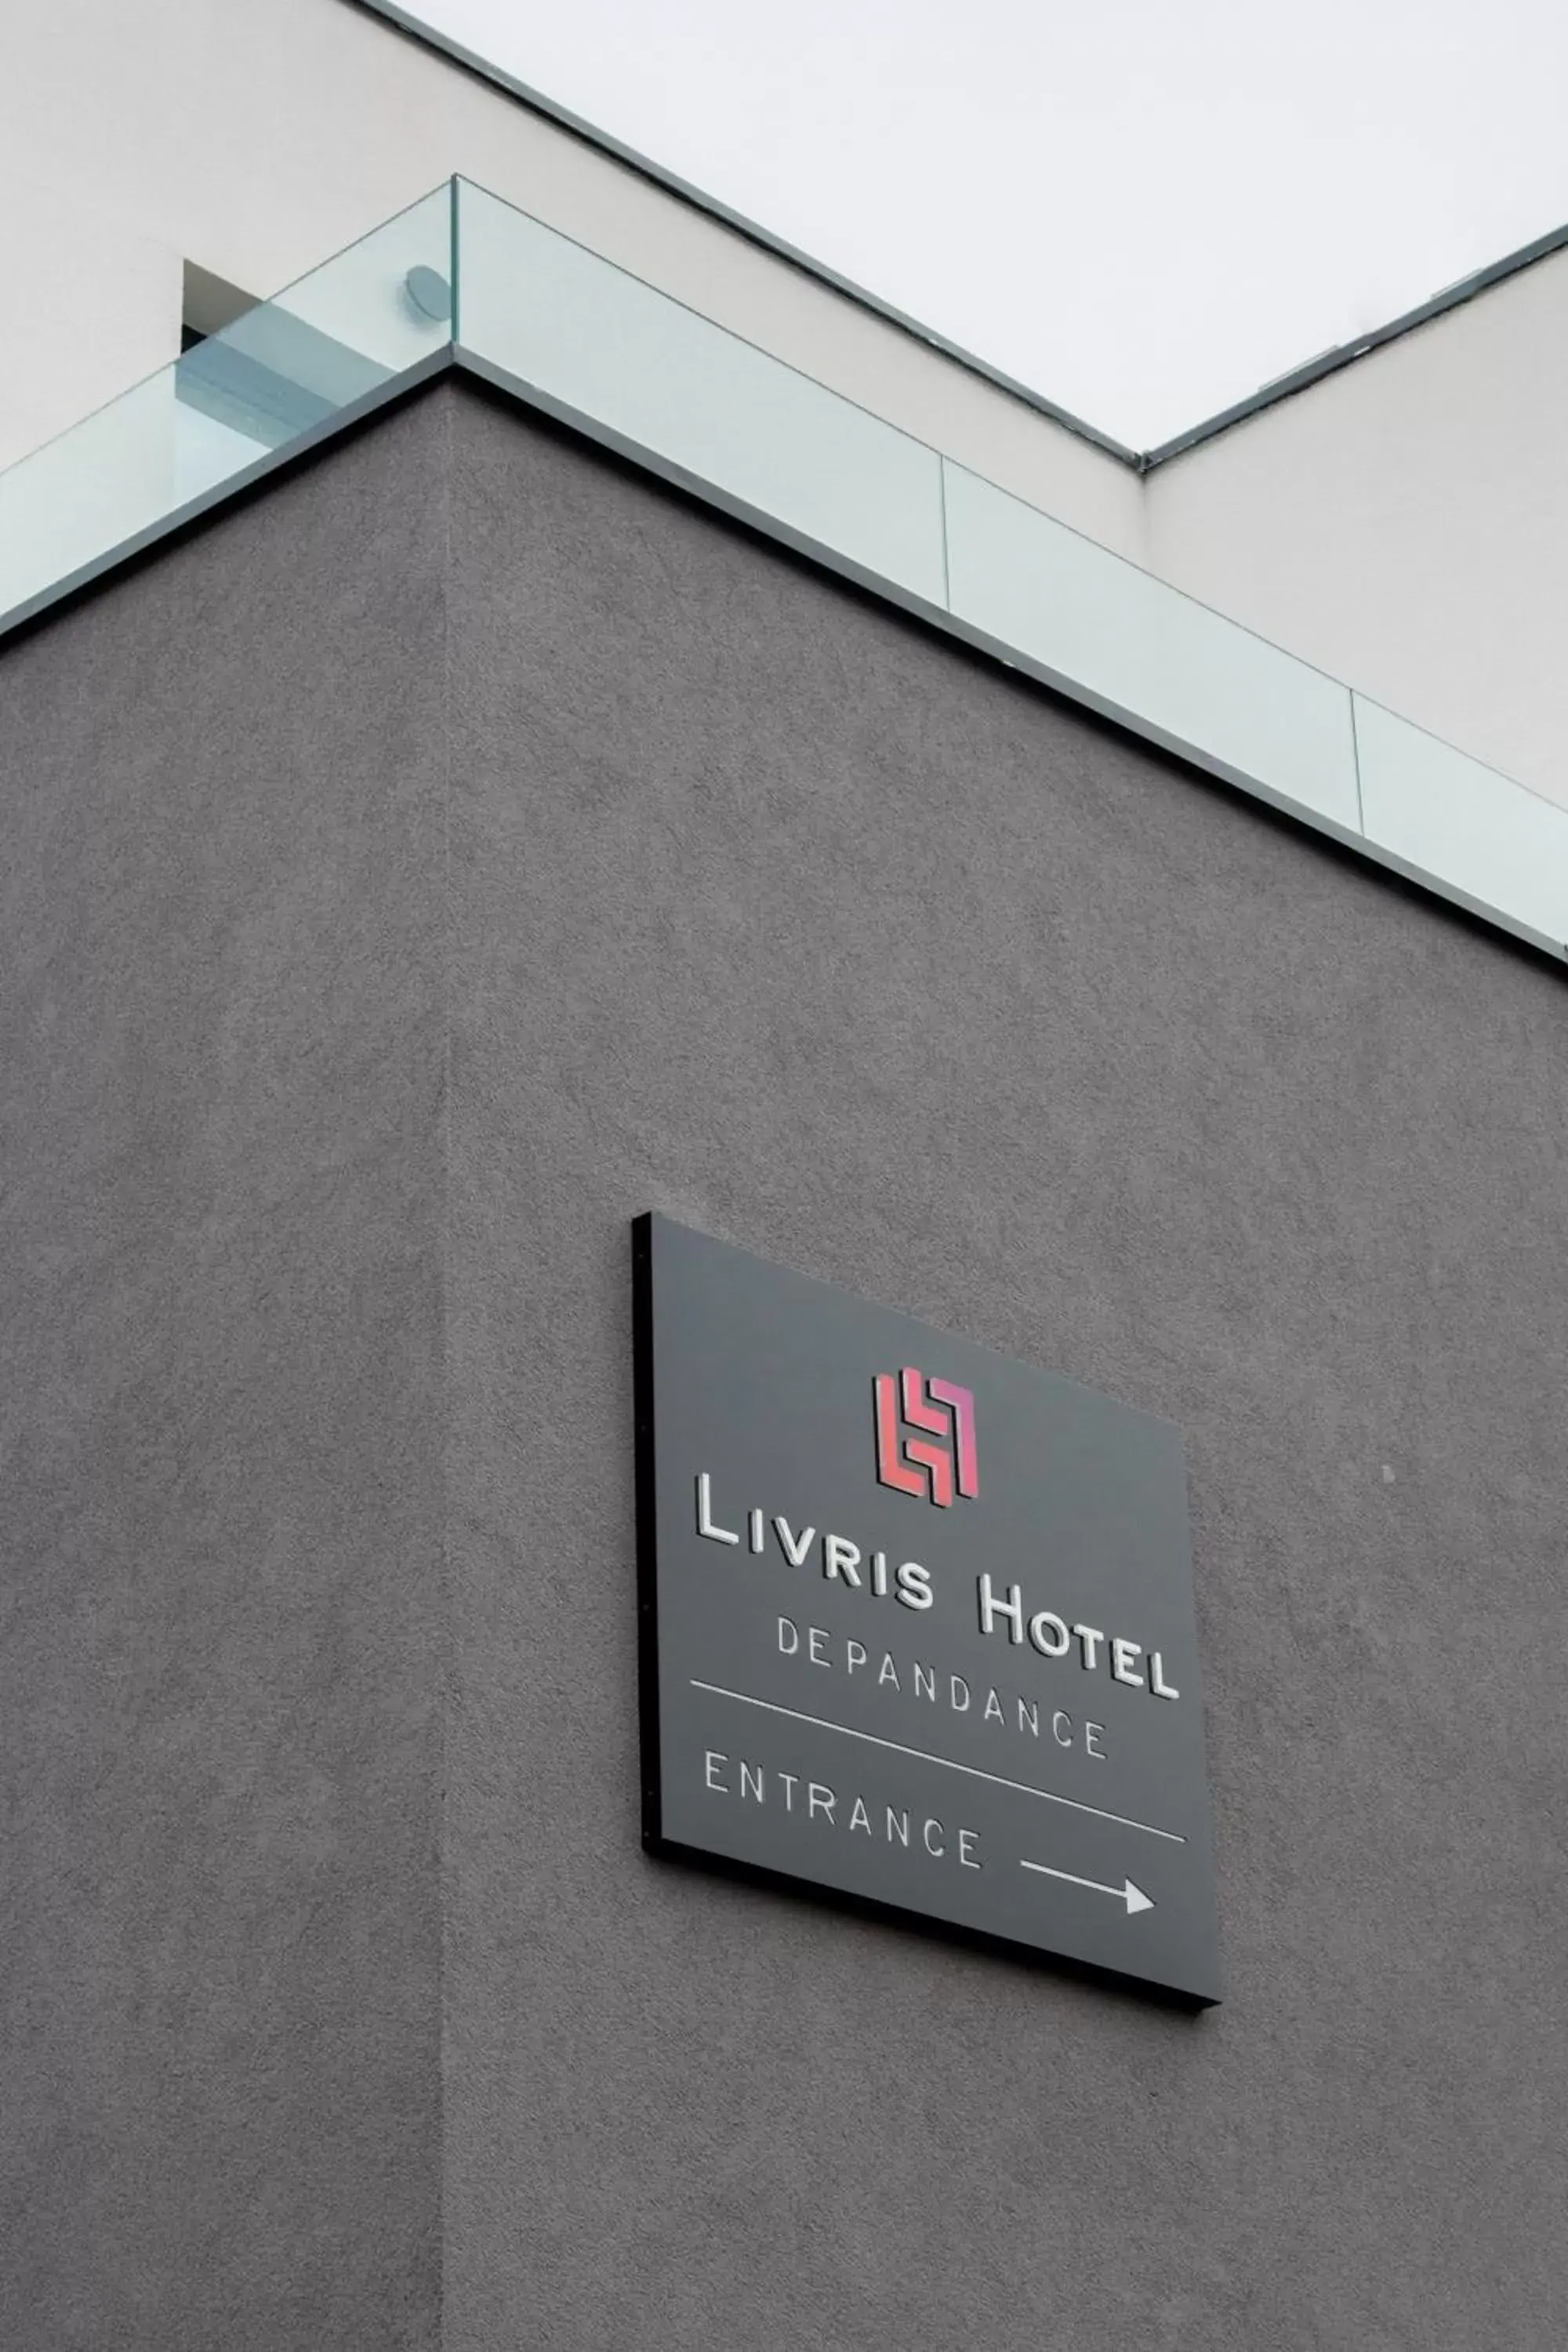 Property logo or sign in Livris Hotel